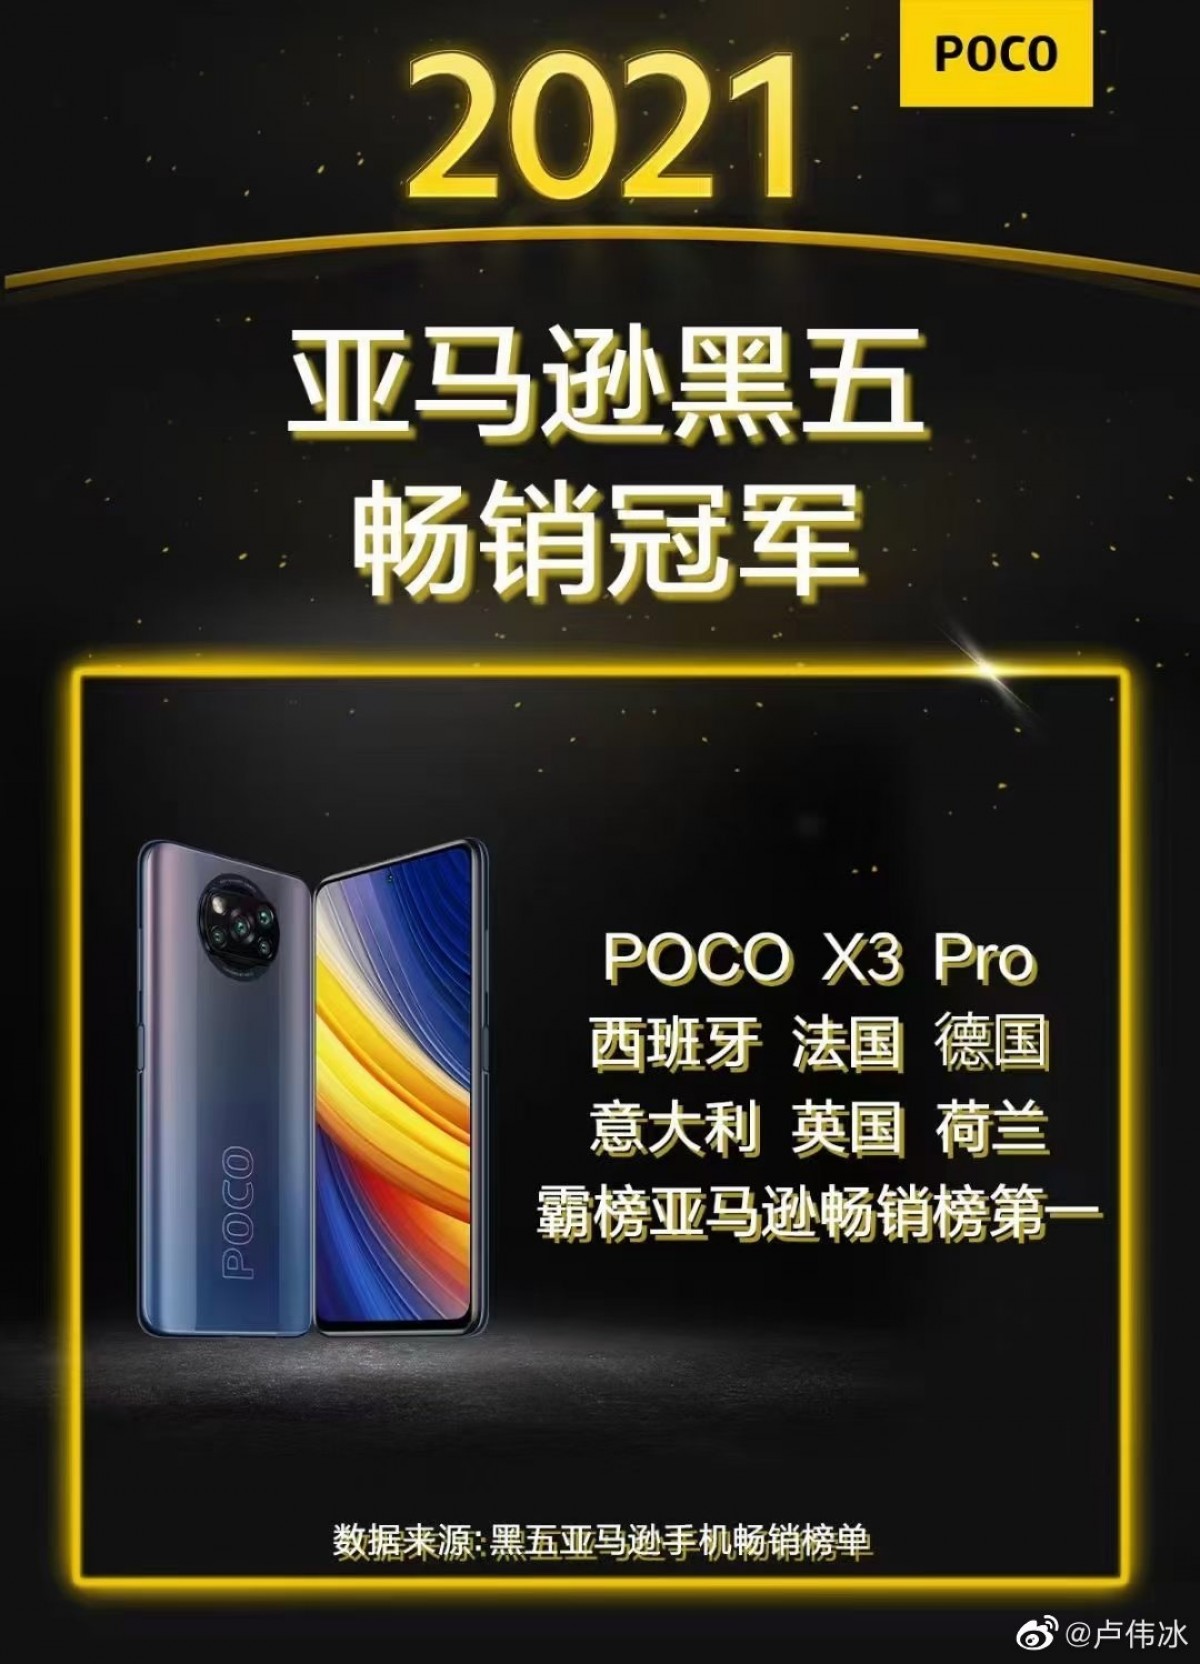 Poco X3 Pro was the best-selling phone in Europe during Black Friday